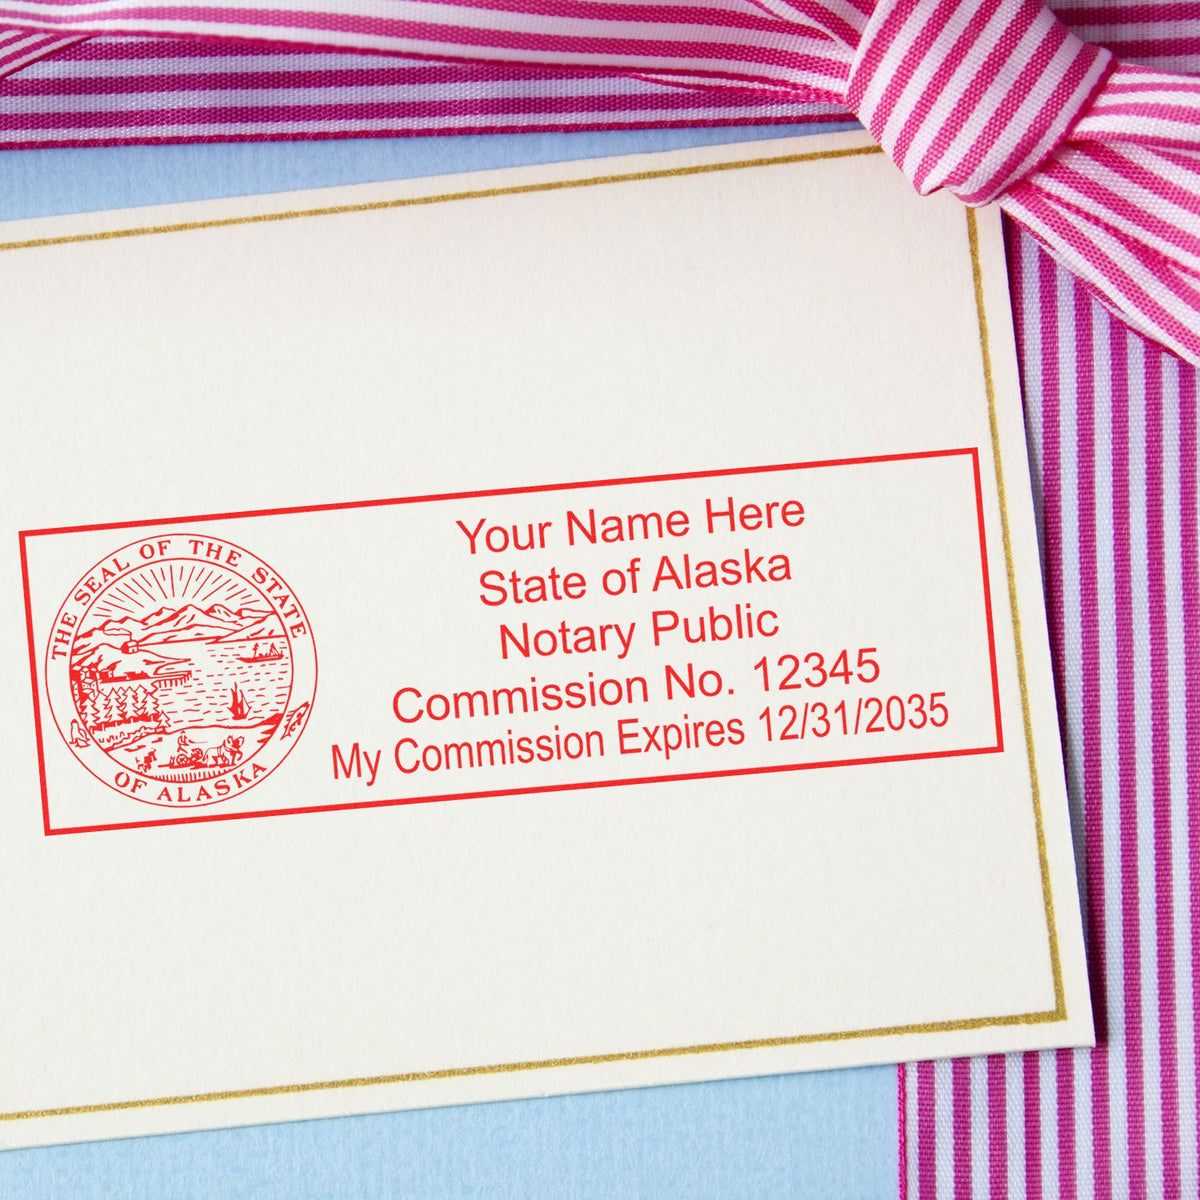 An alternative view of the Slim Pre-Inked State Seal Notary Stamp for Alaska stamped on a sheet of paper showing the image in use